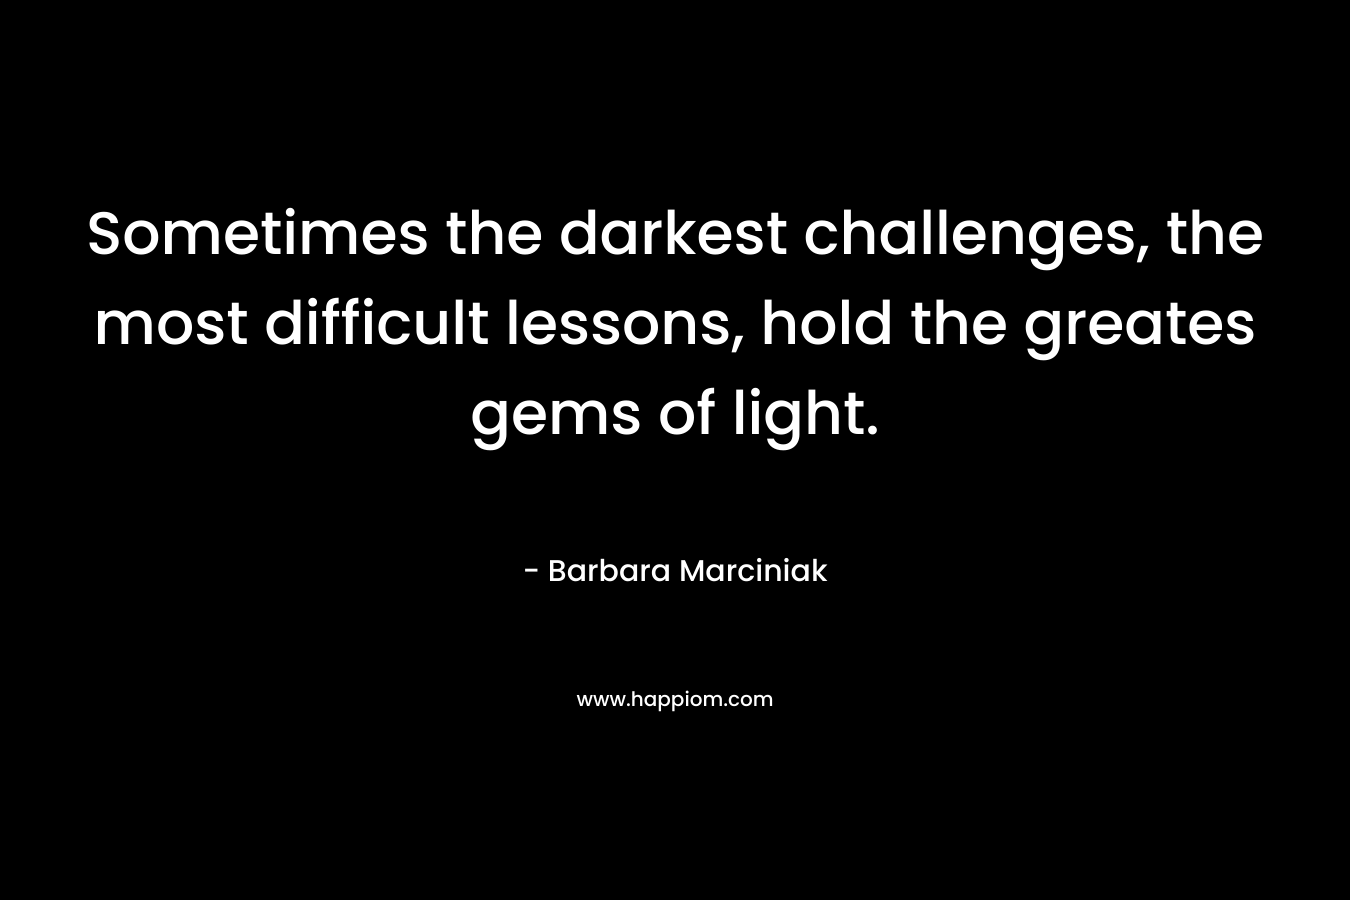 Sometimes the darkest challenges, the most difficult lessons, hold the greates gems of light.